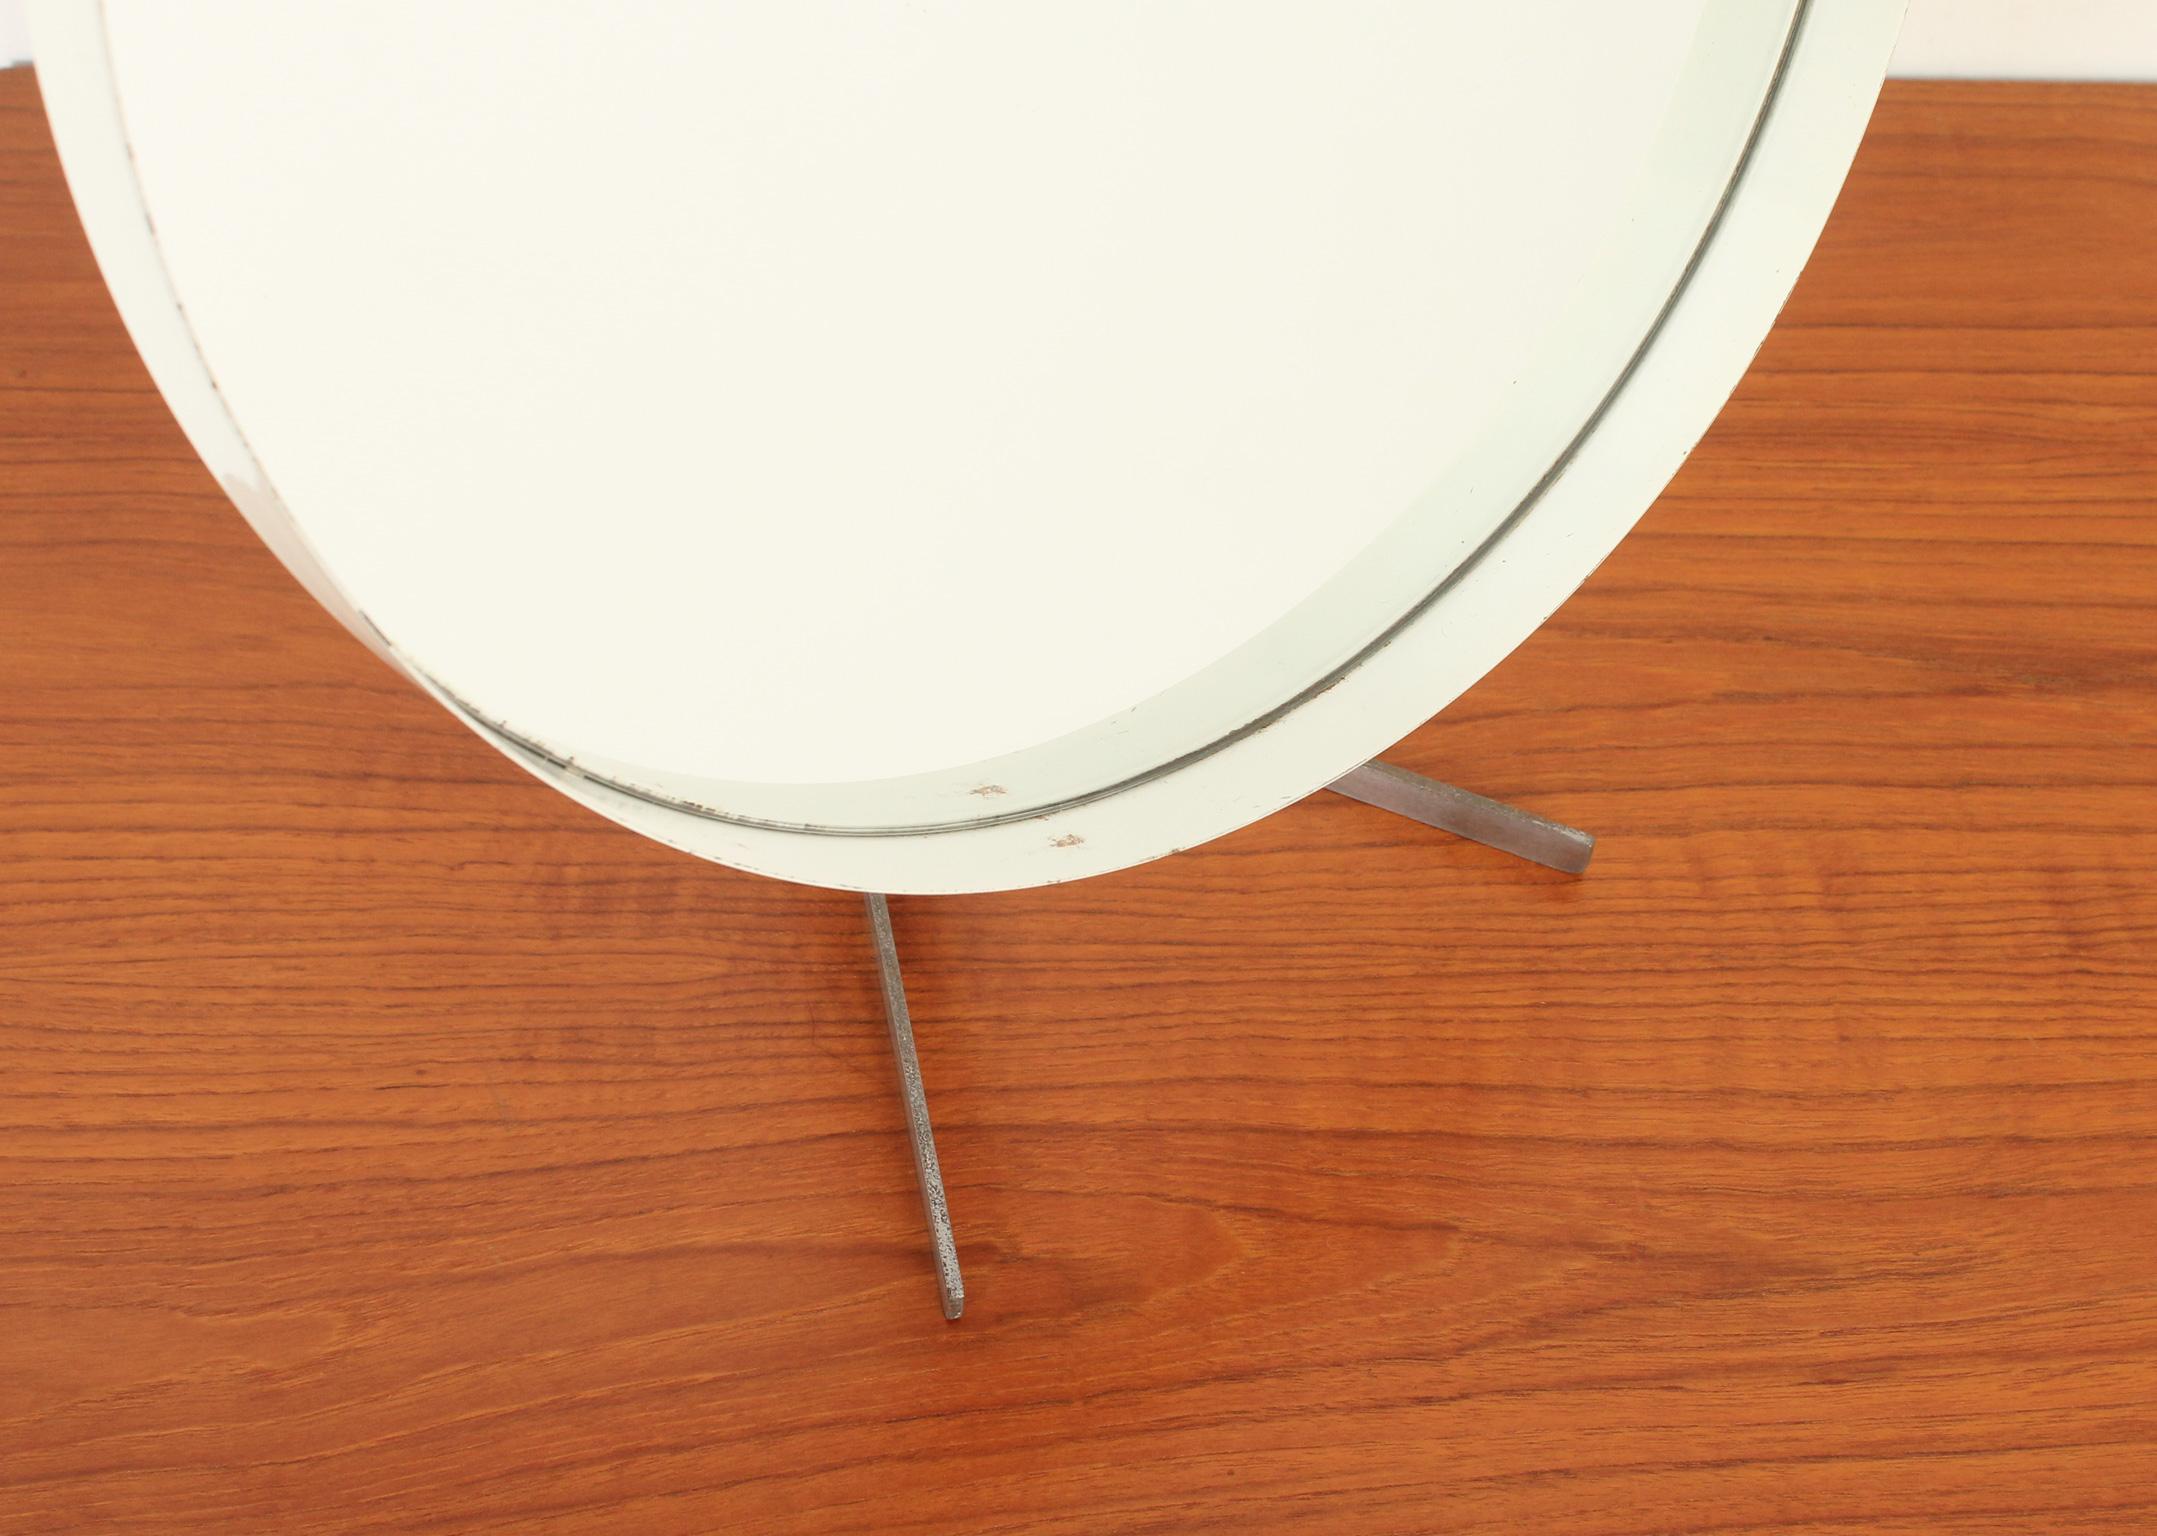 Table Mirror by Robert Welch for Durlston Designs, UK, 1960s For Sale 1